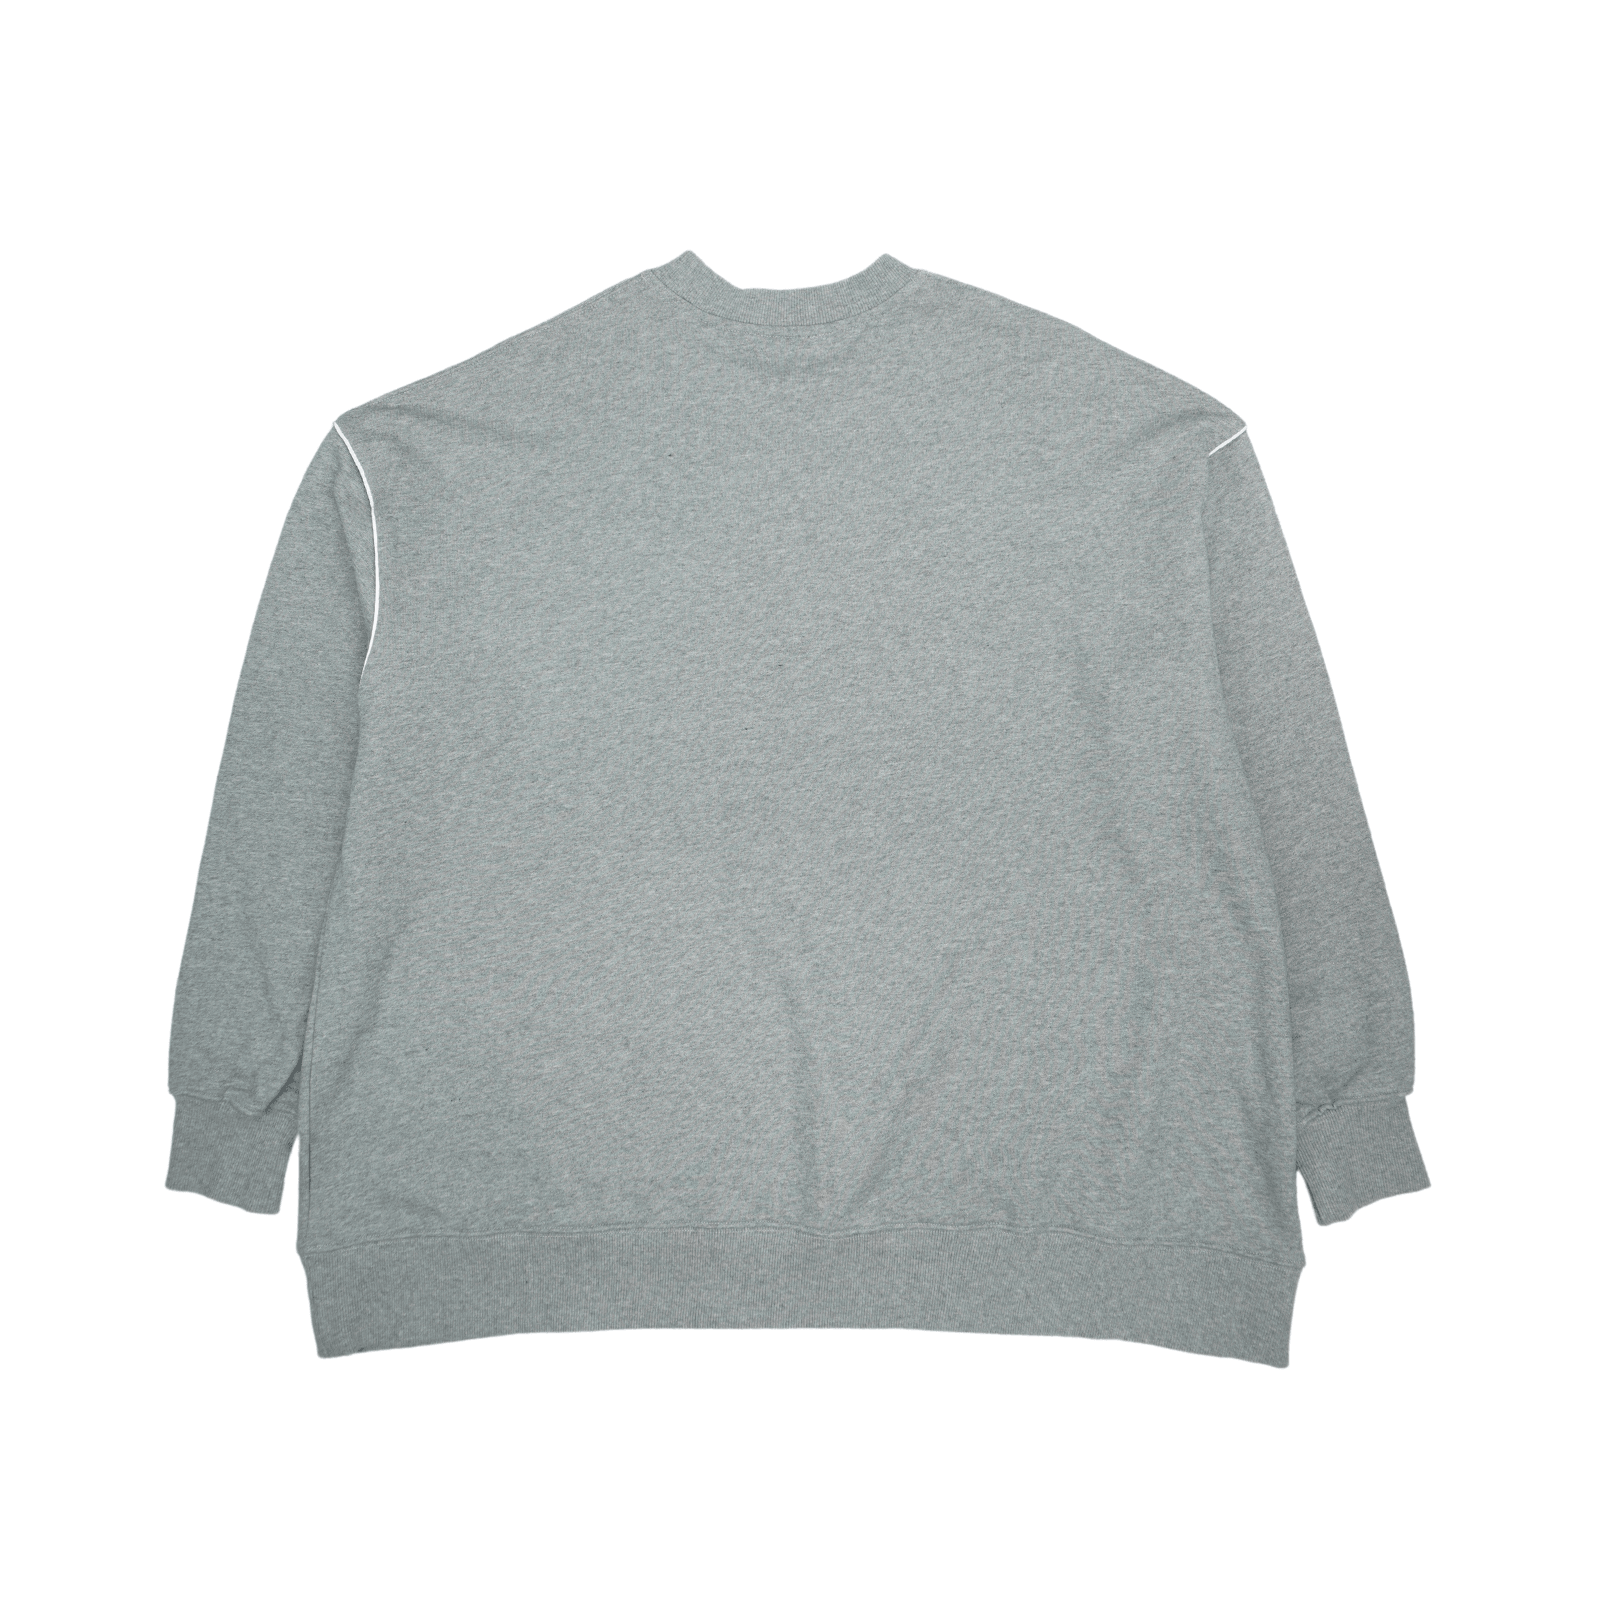 WE11DONE Sweater - Men's S - Fashionably Yours